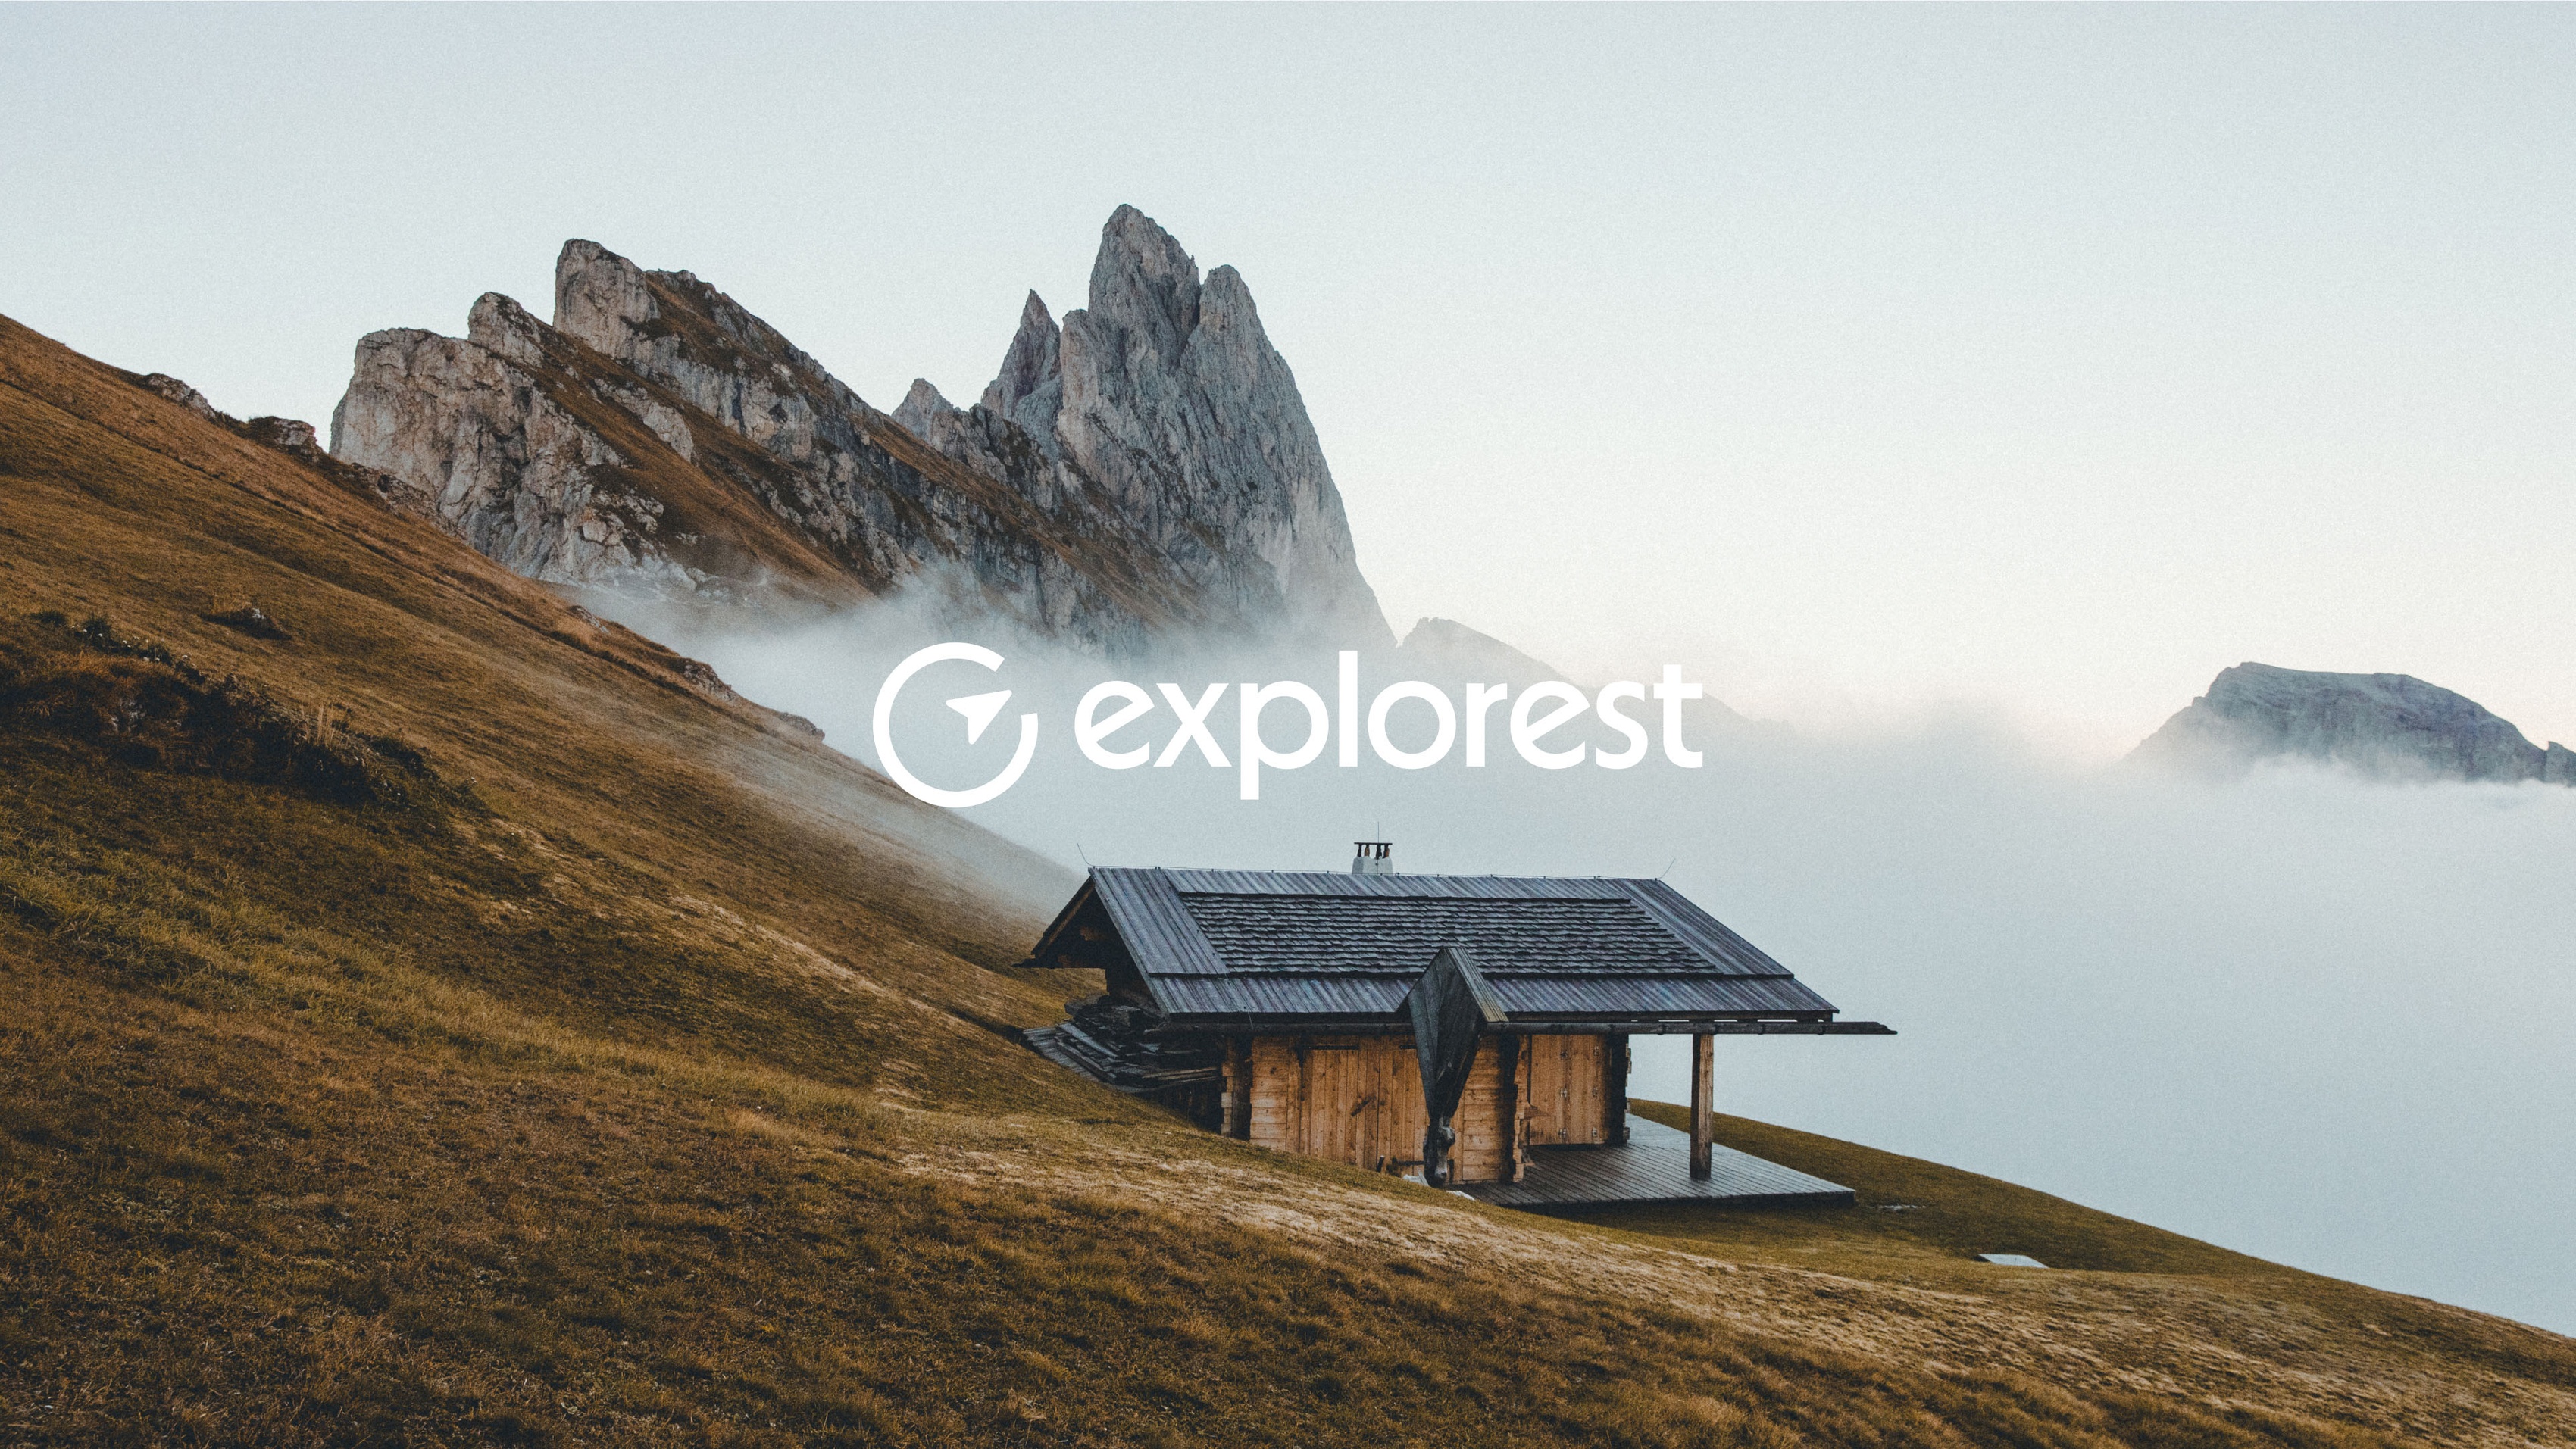 Explorest logo over a photo of a cabin in the fog